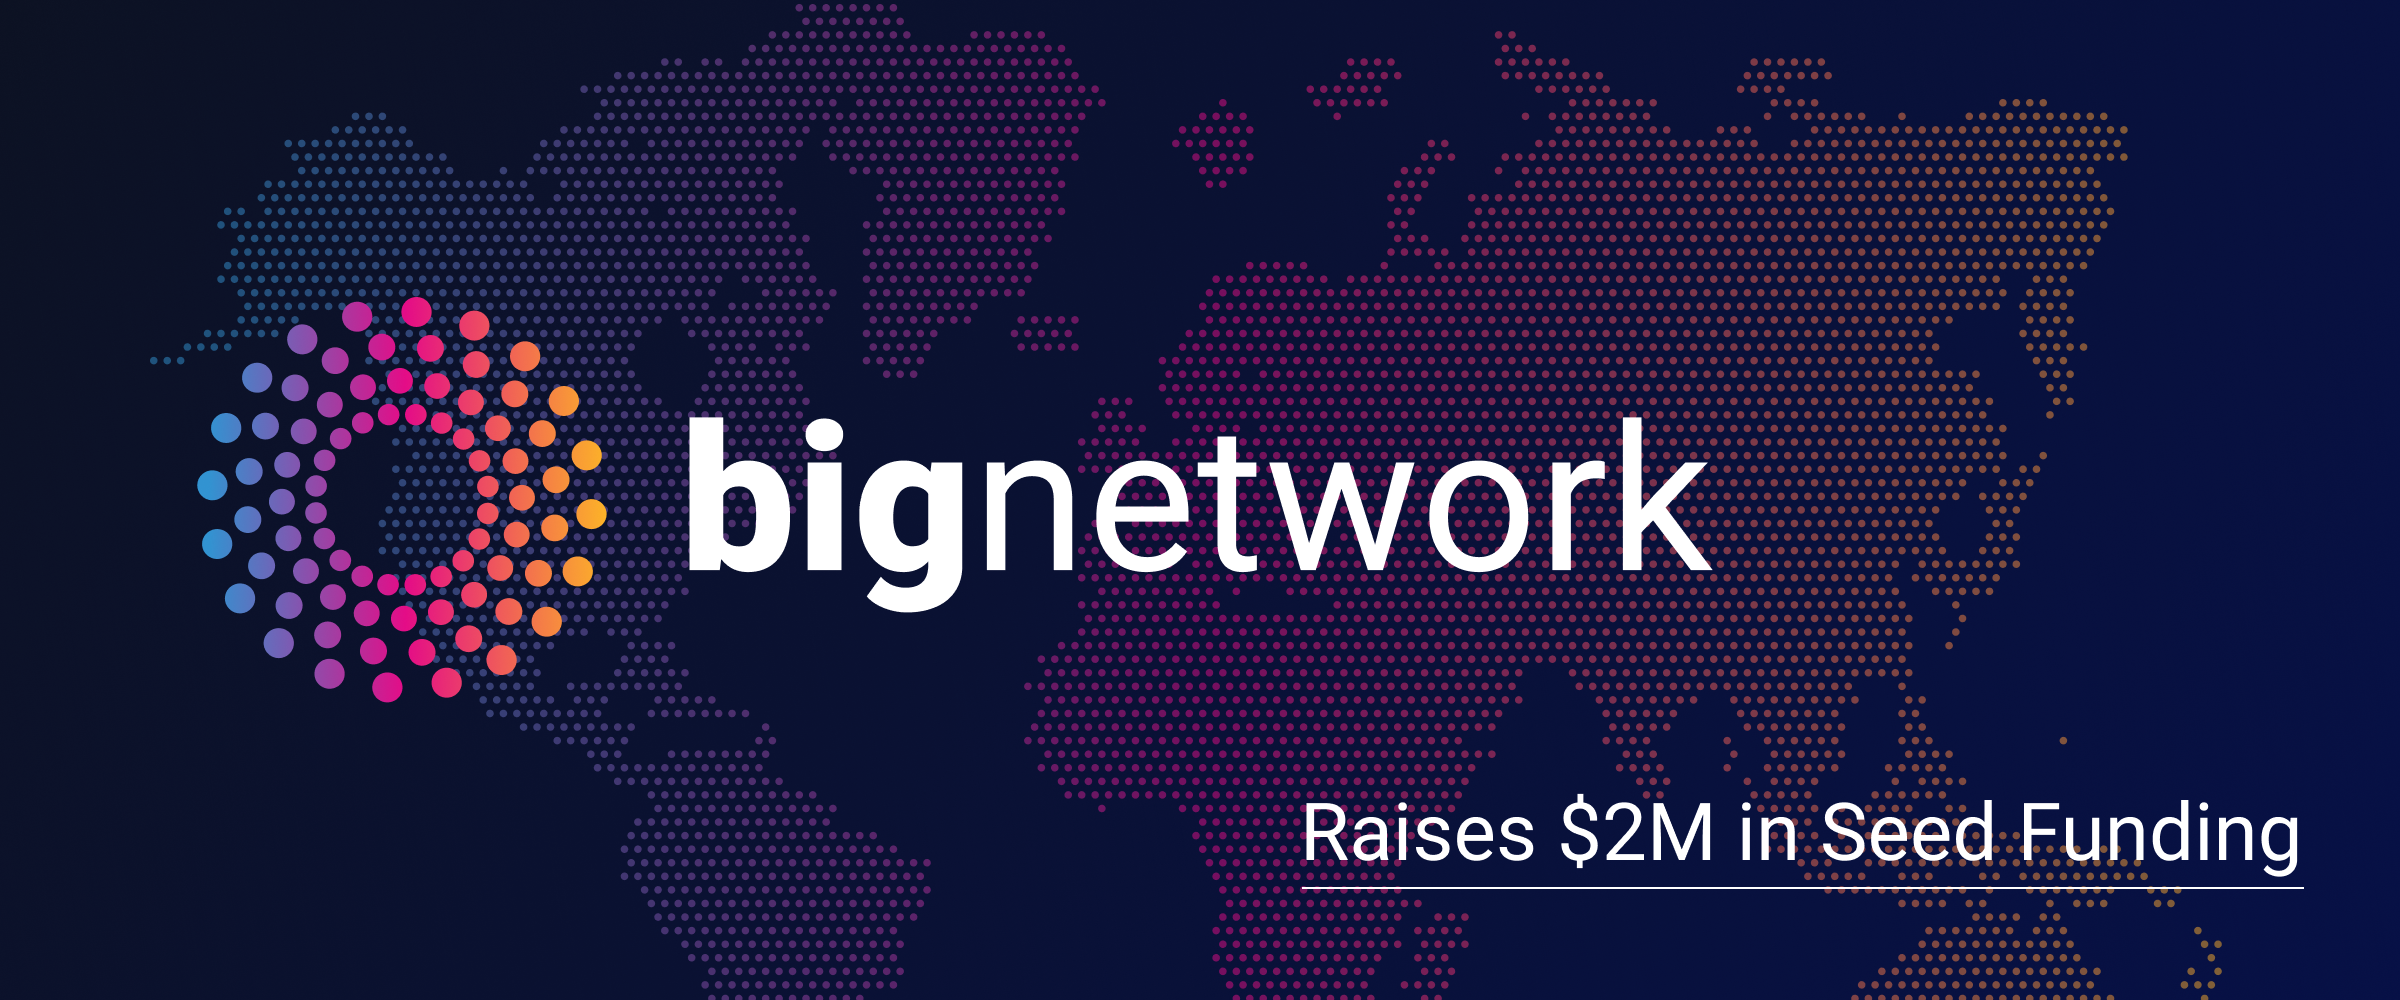 Big Network’s “Work from Anywhere” vision comes to life with $2 Million in seed funding